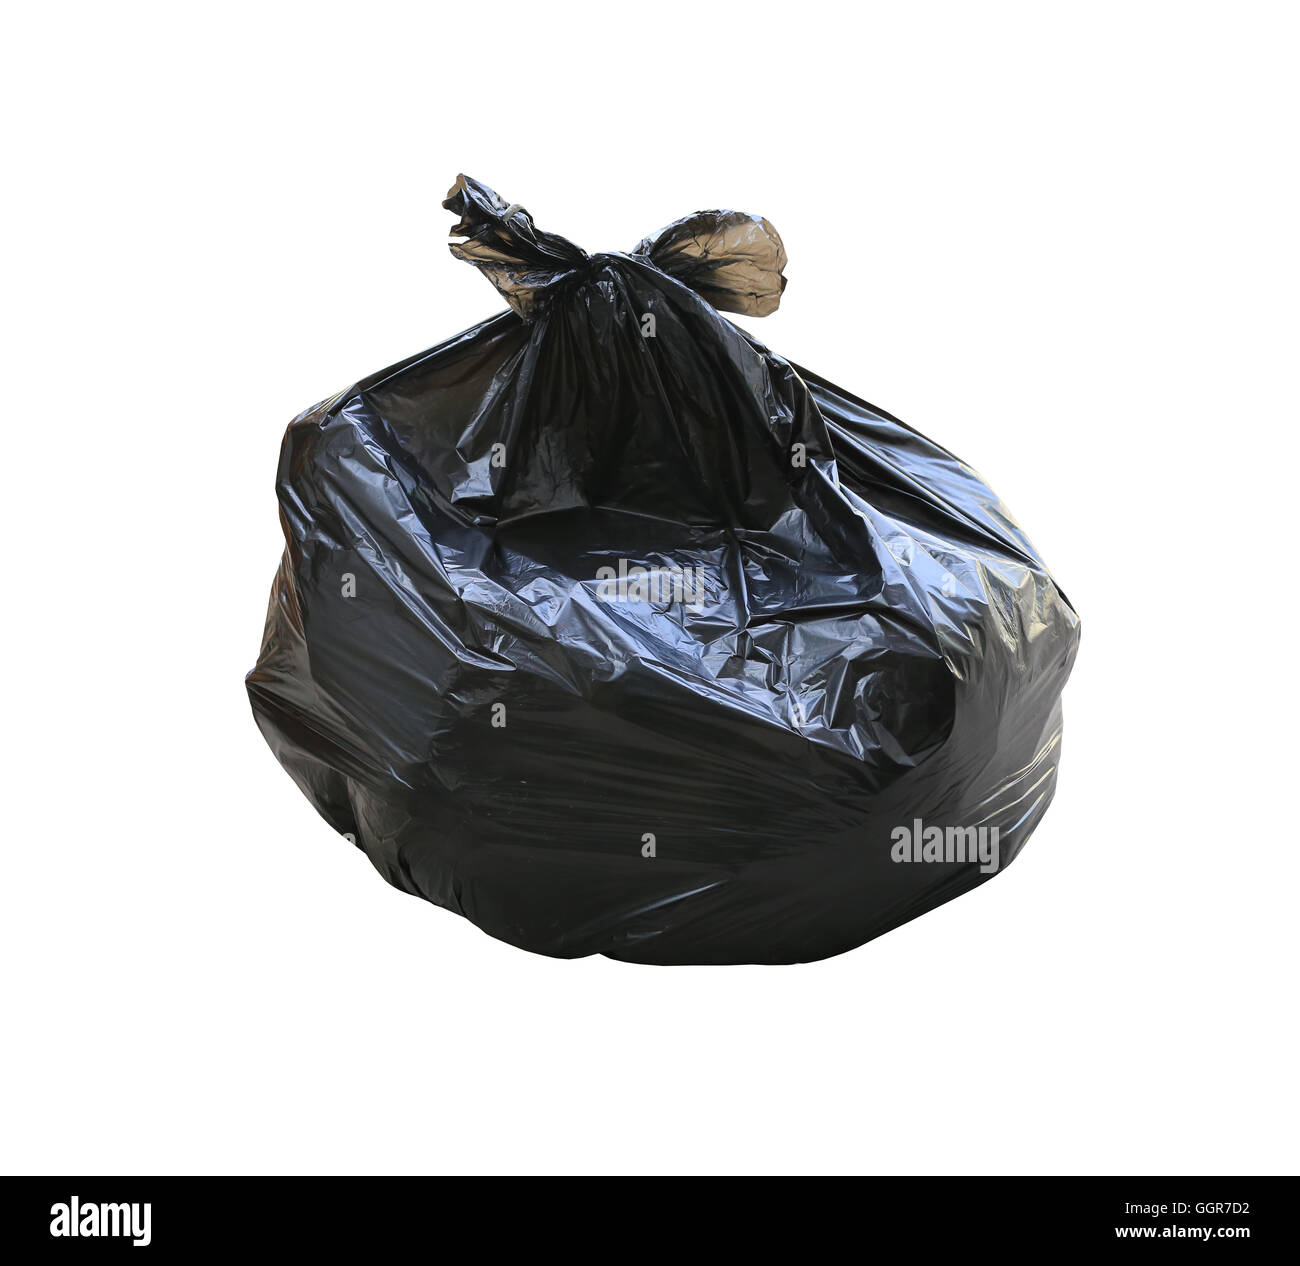 Garbage bag have waste inside isolated on white background and have clipping path. Stock Photo